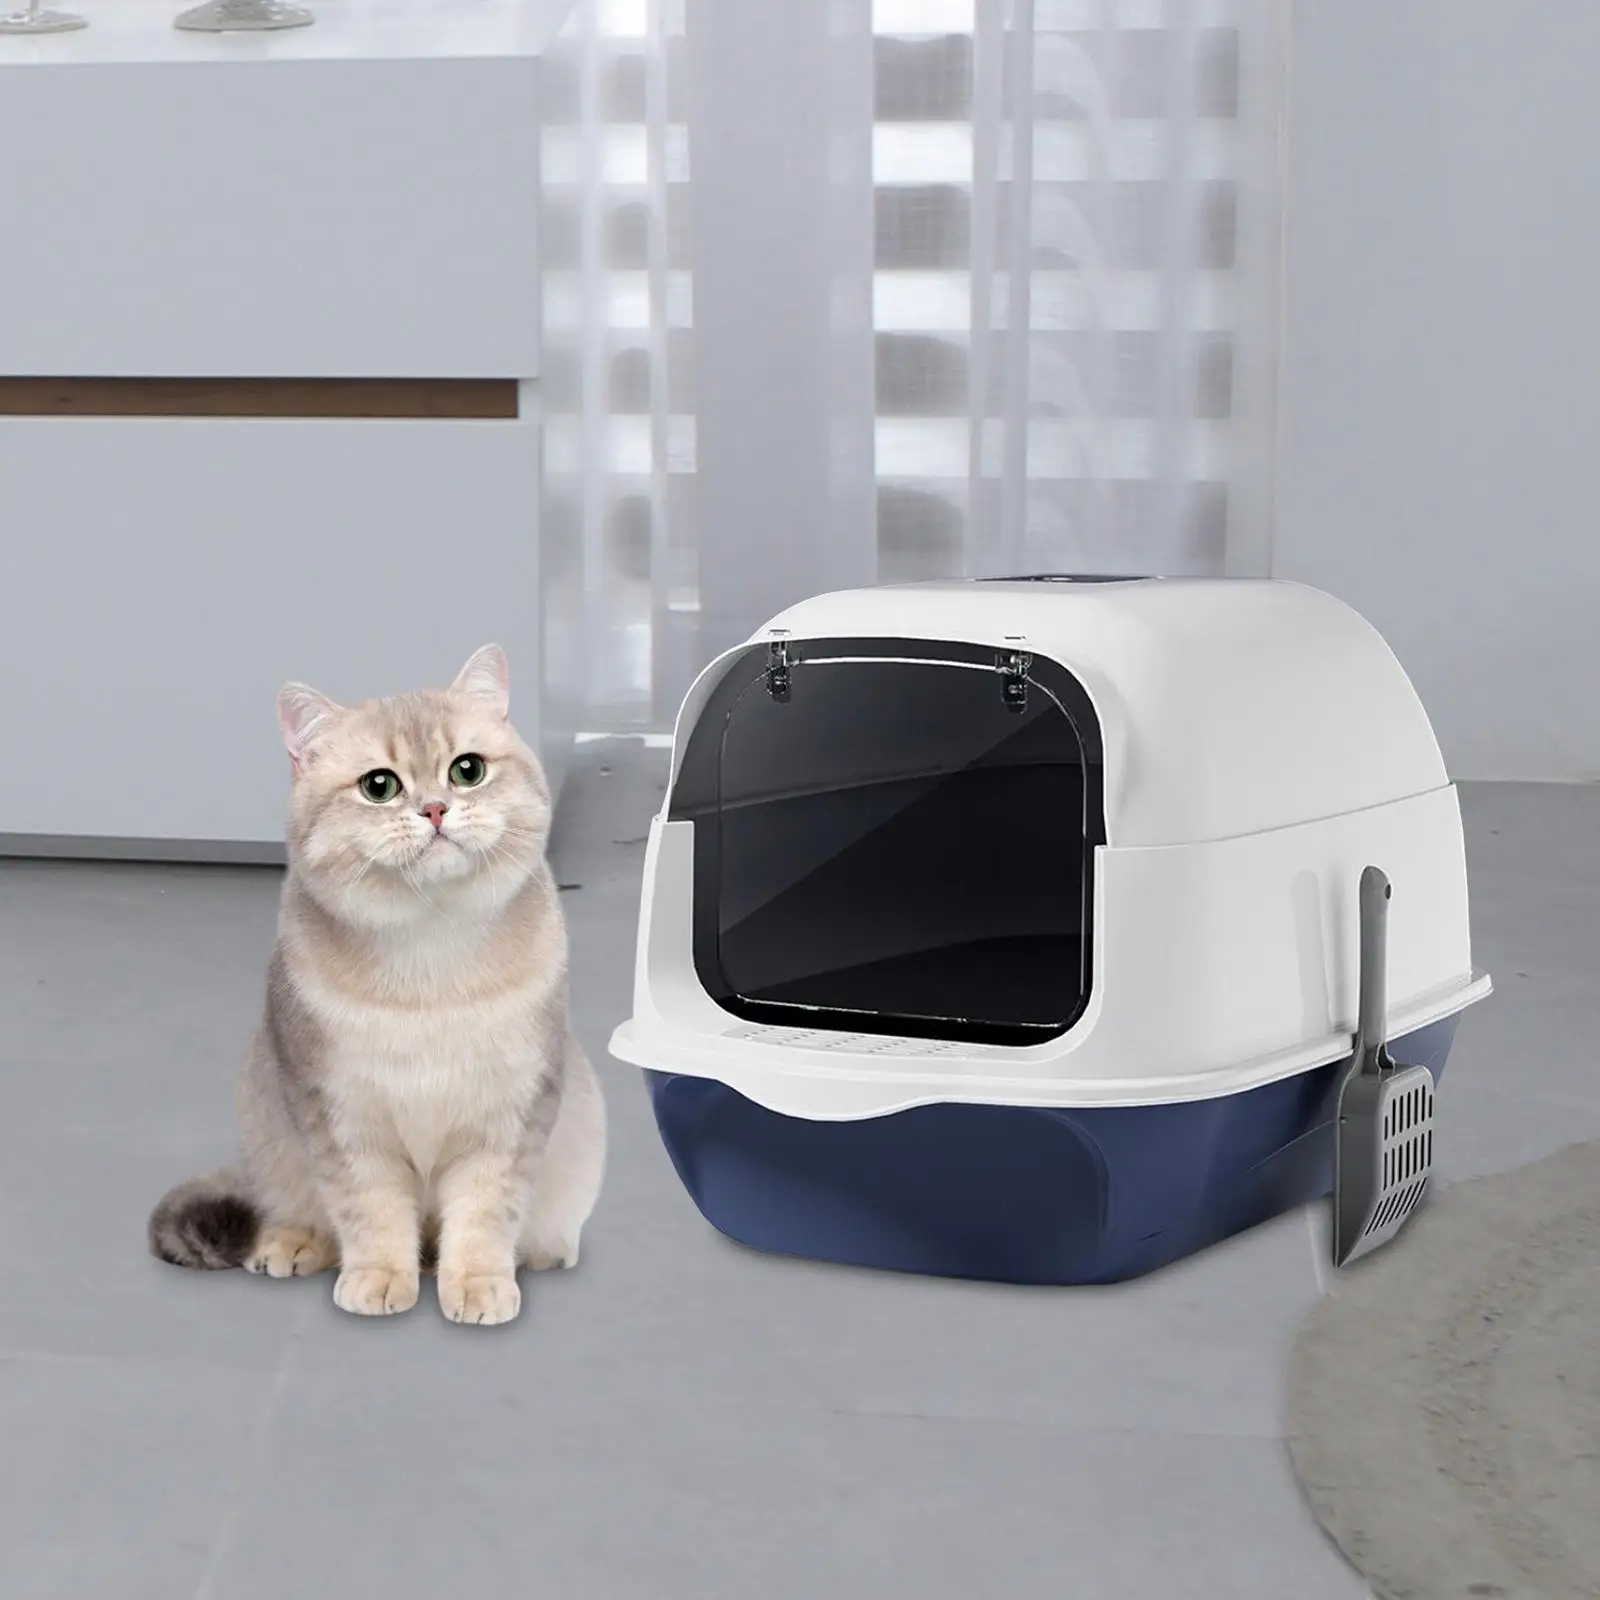 Hooded Cat Litter Box Enclosed and Covered Cat Toilet Portable Large Cat Litter Box with Door Pet Litter Tray Pet Litter Box